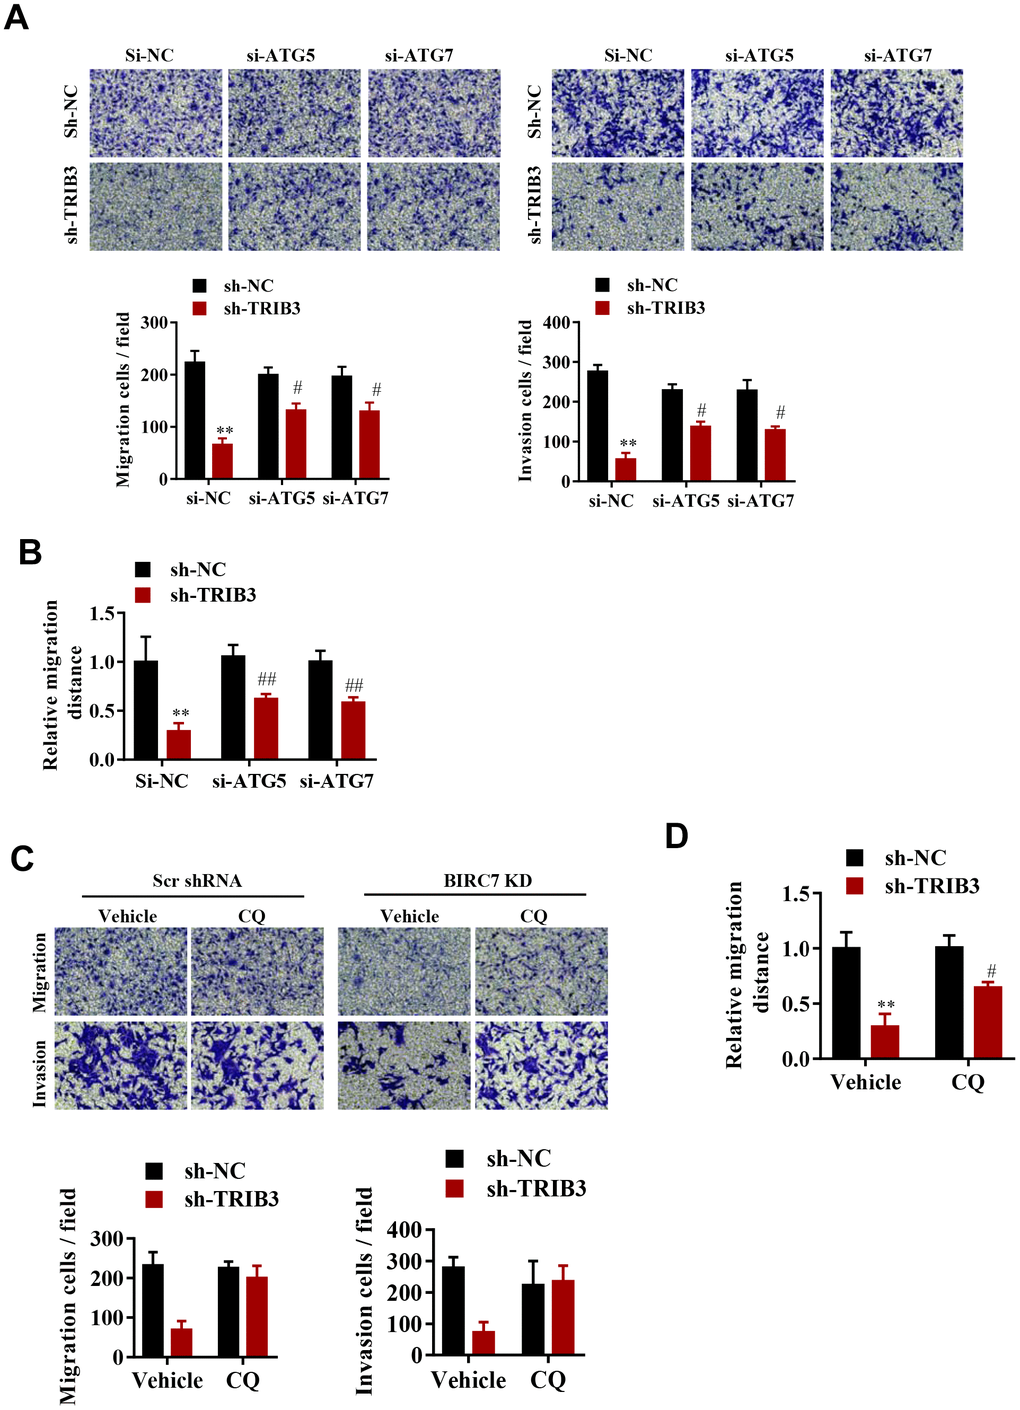 TRIB3-mediated suppression of autophagy promotes the proliferation and migration of GBM cells. (A, B) Migration ability (A) and invasion ability (B) were determined after the downregulation of TRIB3 coupled with downregulation of ATG5 or ATG7 in GBM cells using a migration assay and a Transwell assay. (C) Relative migration distance was determined in GBM cells using a migration assay. (D) Migration ability and invasion ability were determined after downregulation of TRIB3 and treatment with the autophagy inhibitor CQ or vehicle (DMSO) in GBM cells using a migration assay and a Transwell assay. E, Relative migration distance was determined in GBM cells using a migration assay. *p#p